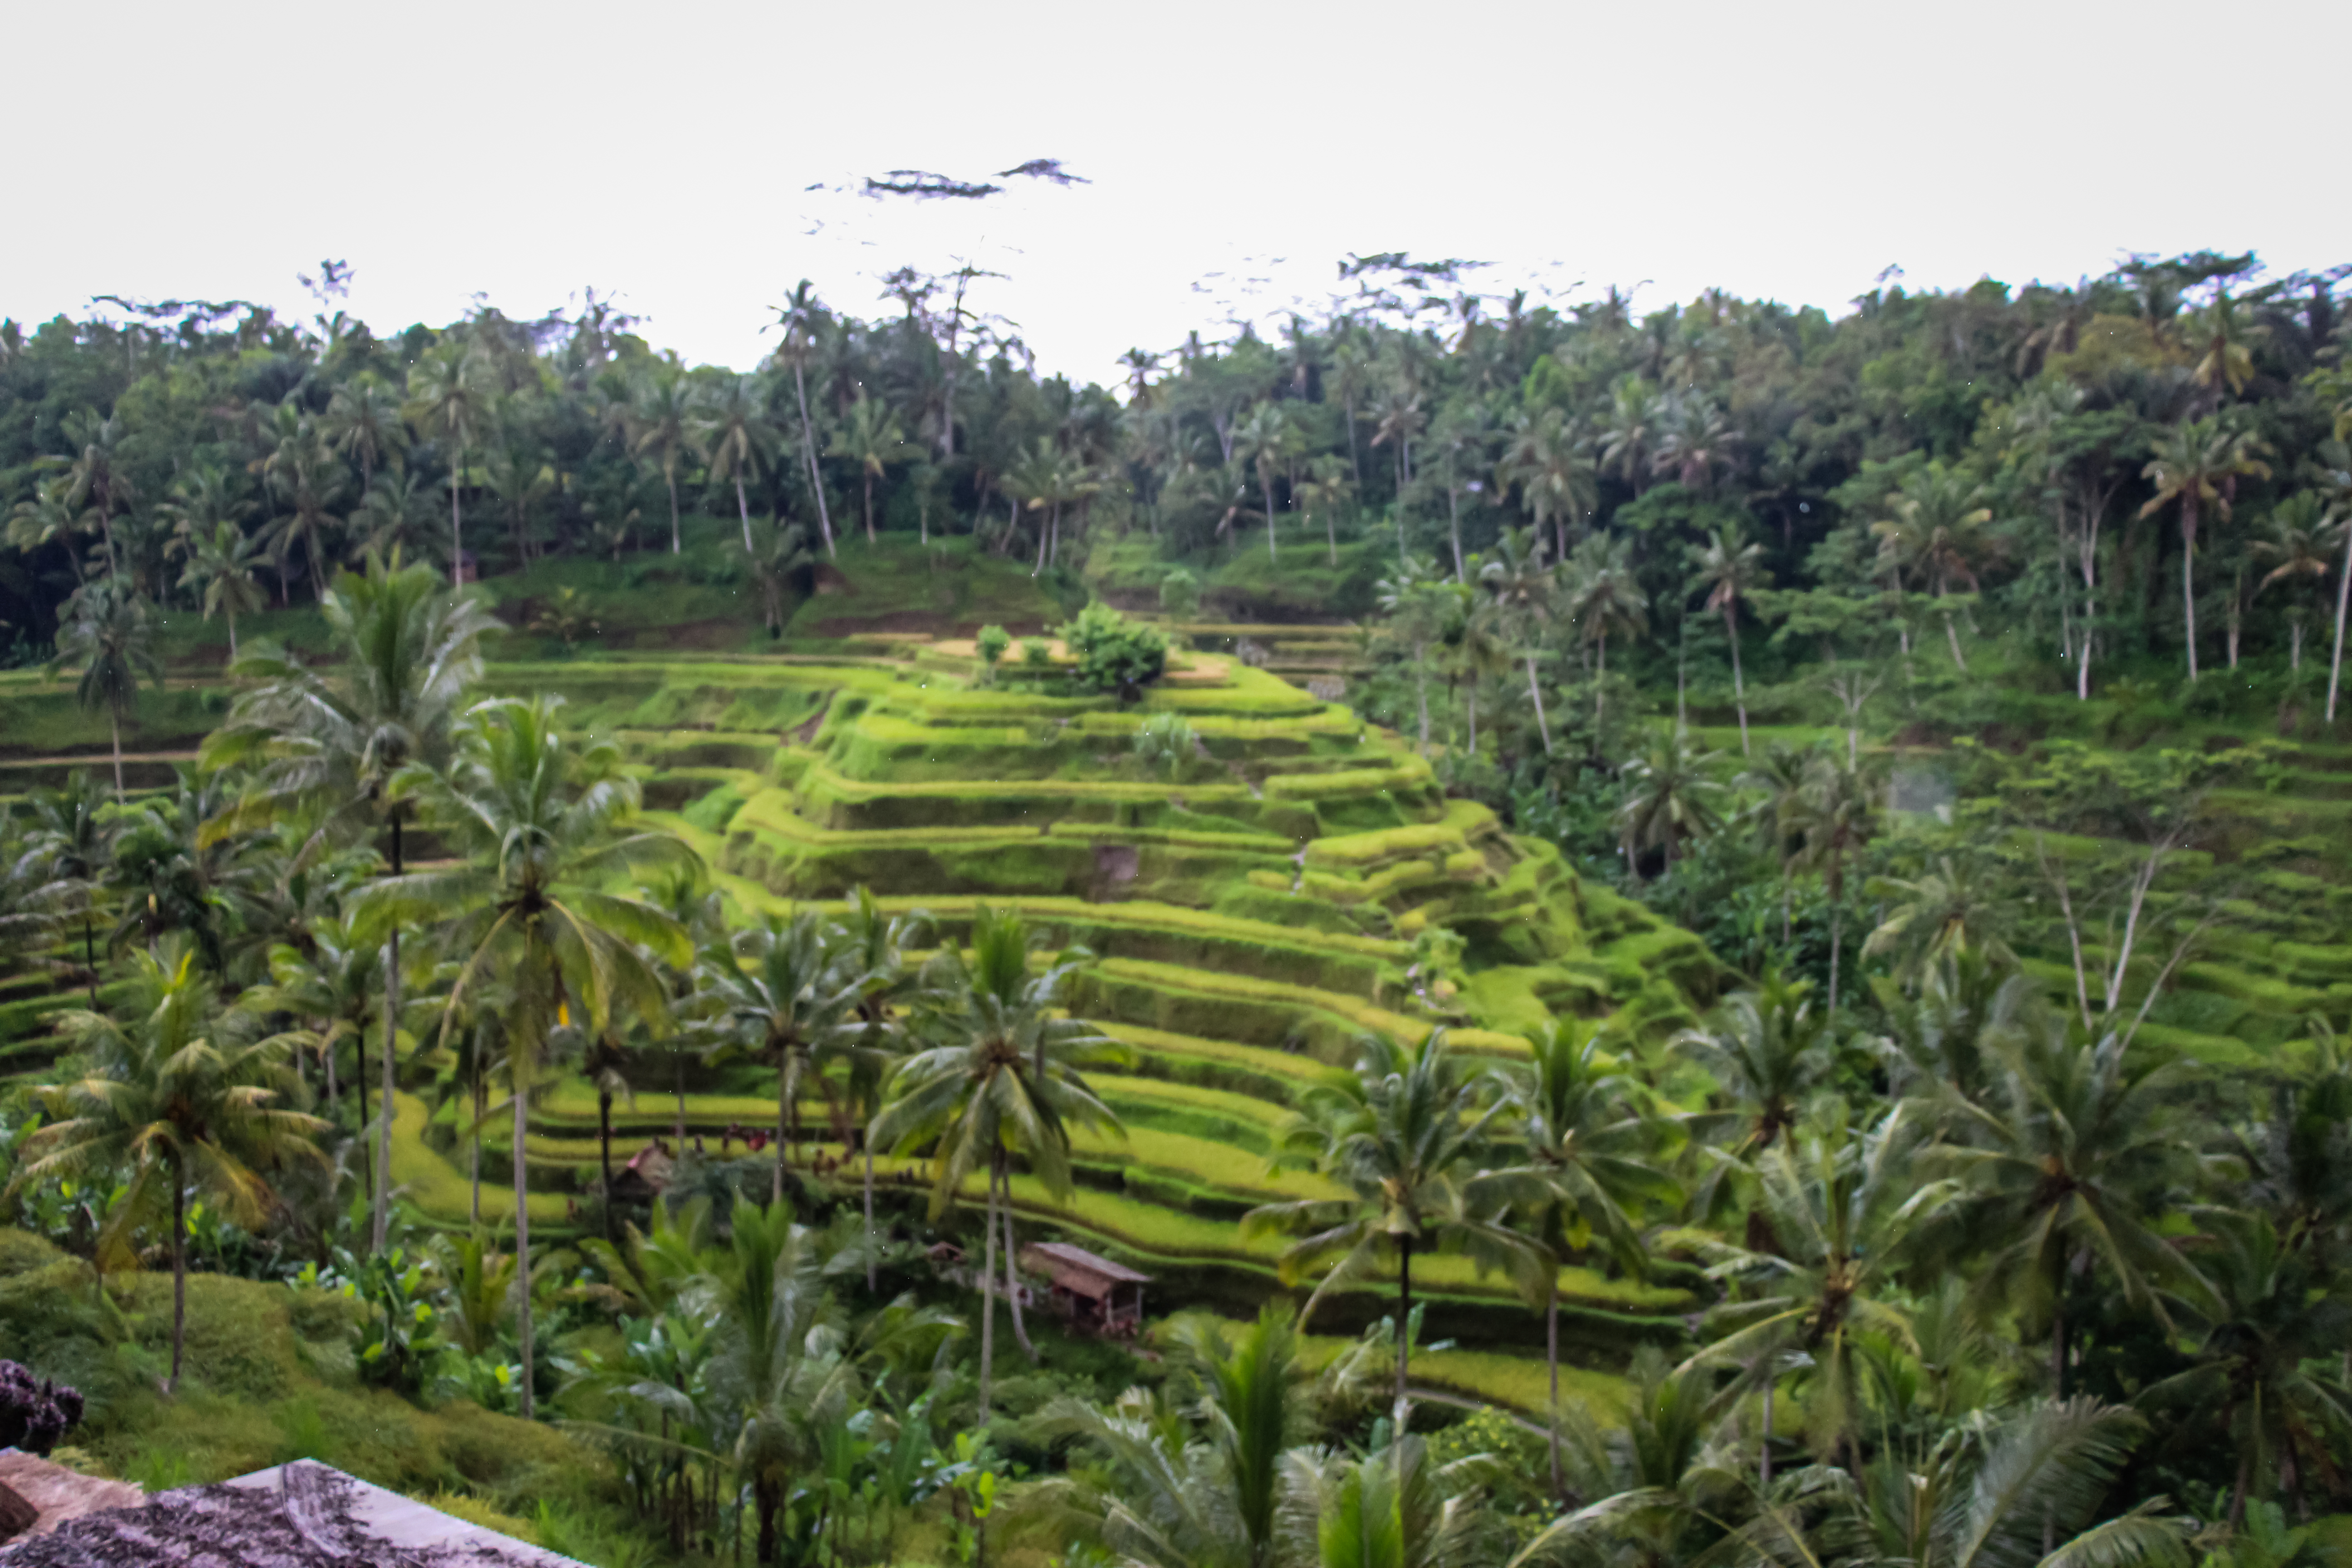 Best Things to Do in Bali - Tegalalang Rice Terrace